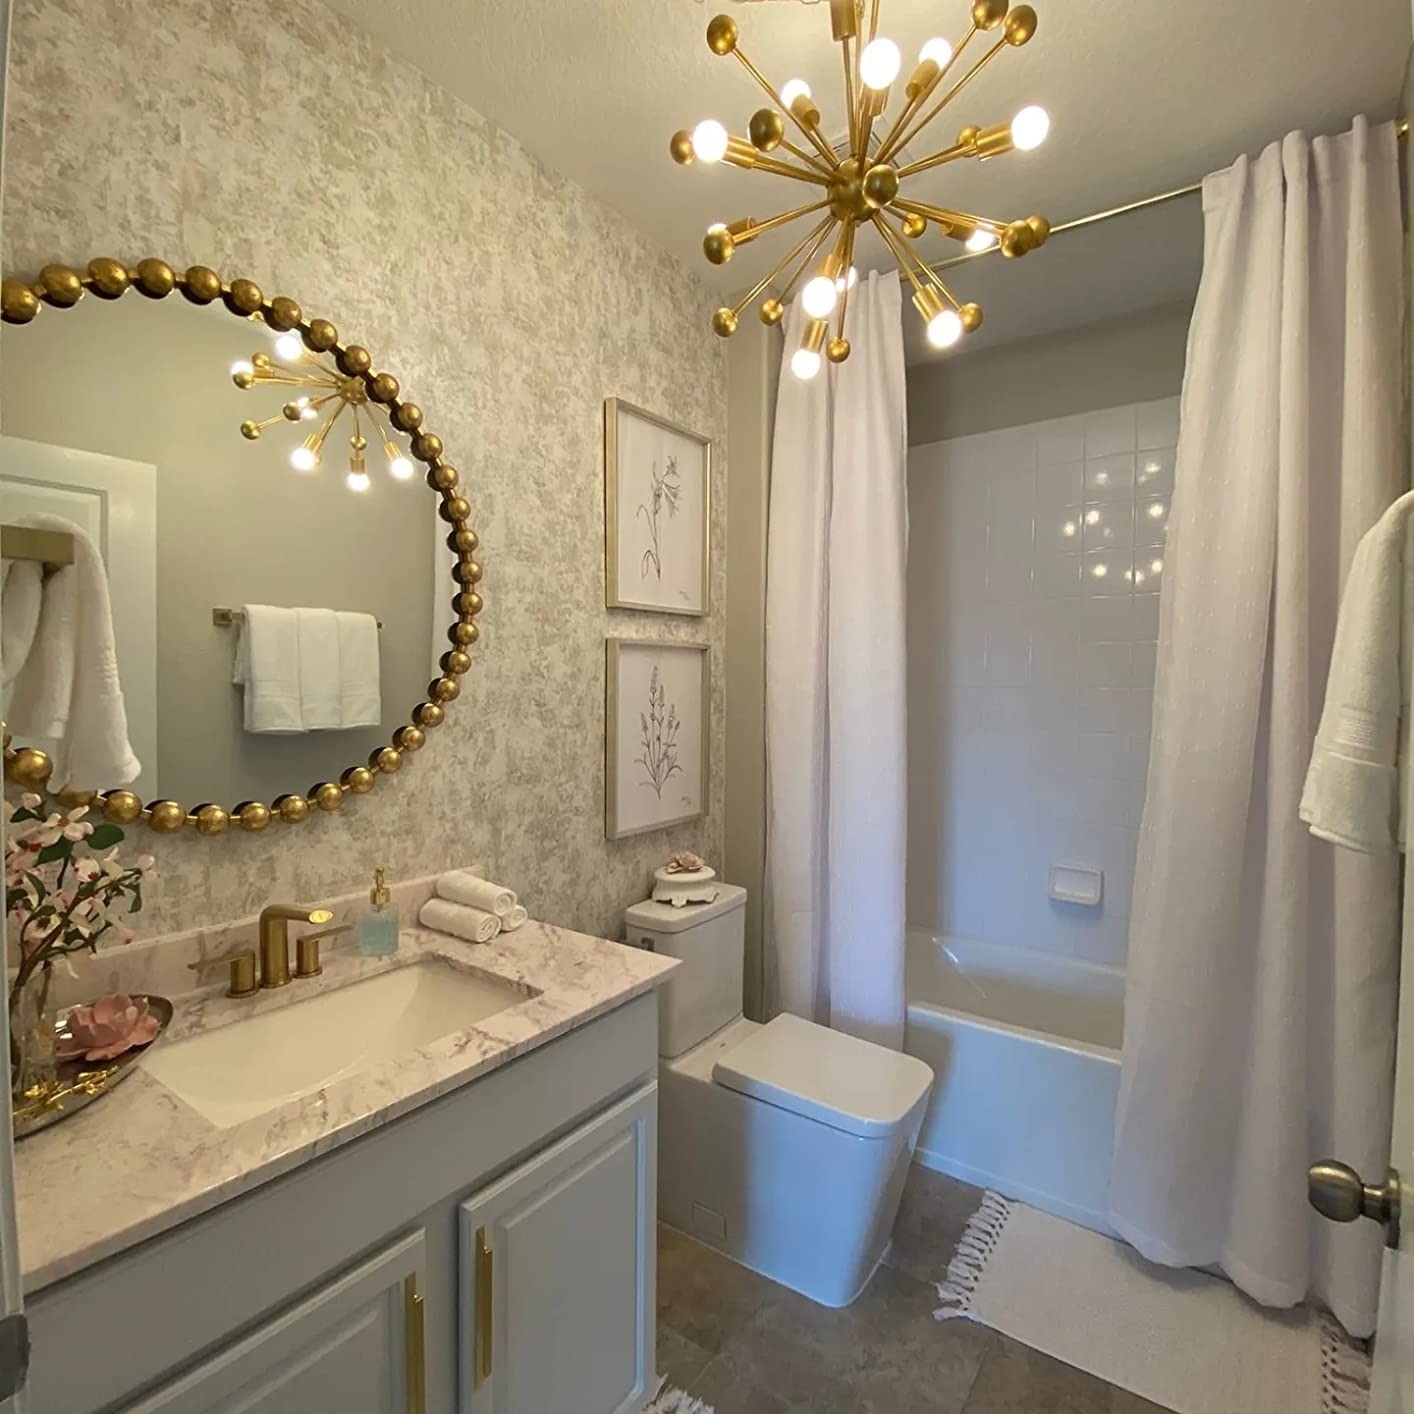 A bathroom with the wallpaper on the walls